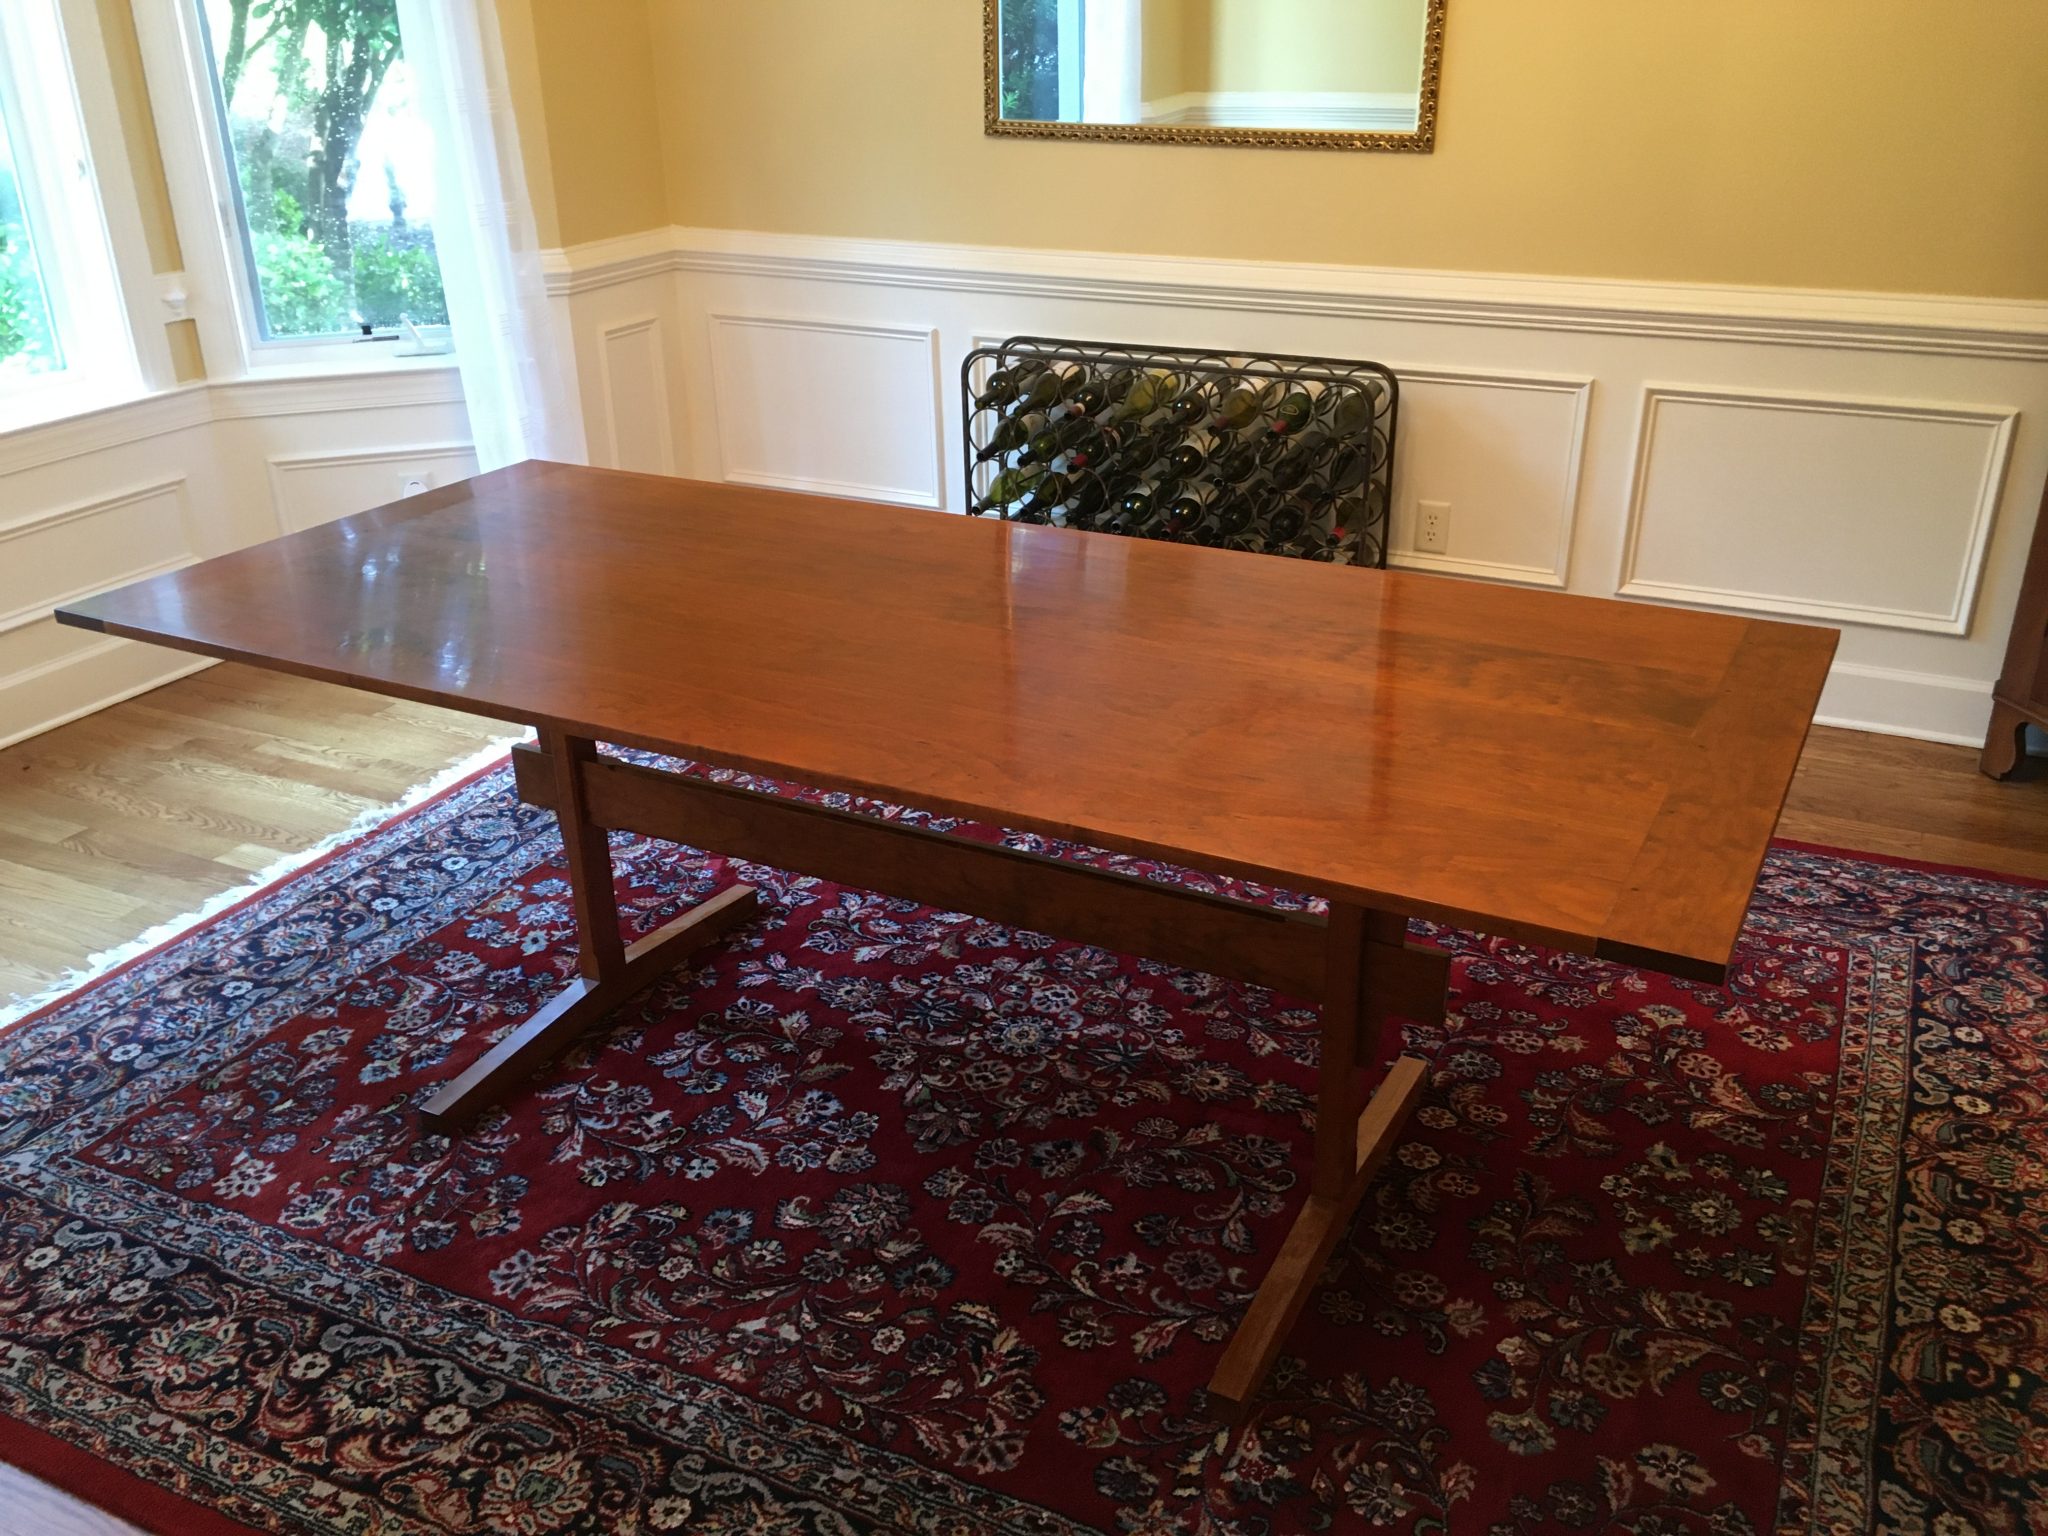 Dining room table 84” x 36” with breadboard ends